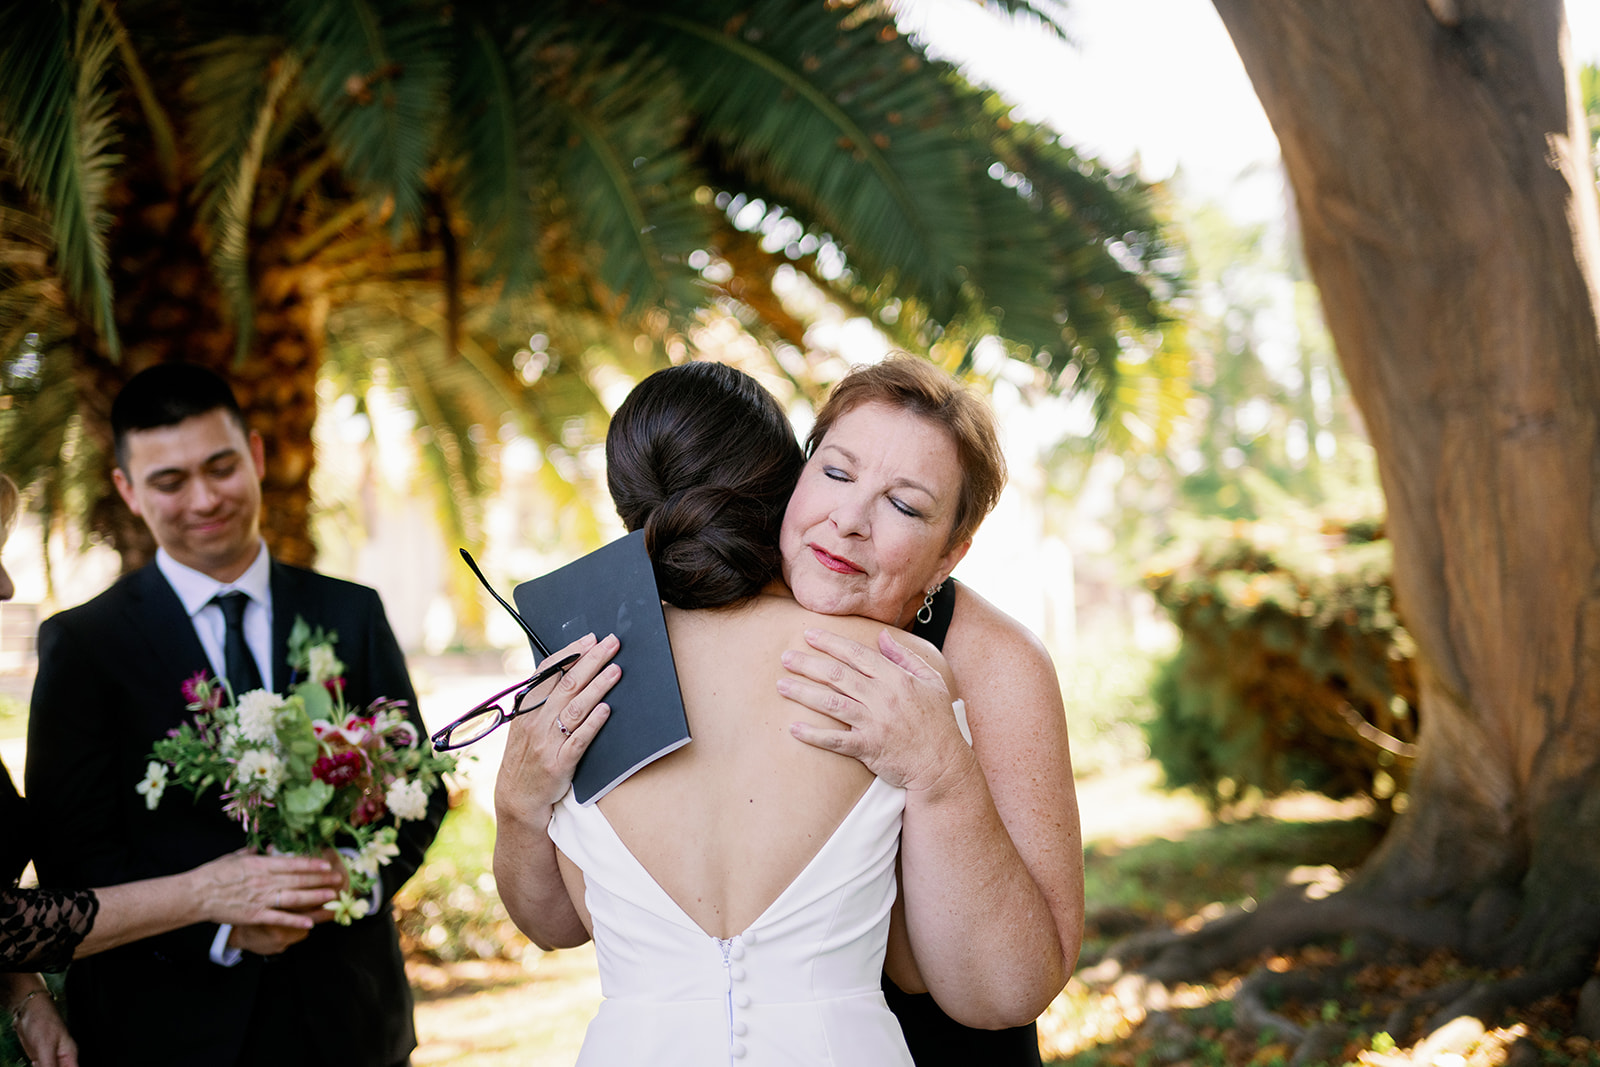 Bride hugging her aunt and ceremony officiant at the Santa Barbara Courthouse gardens.